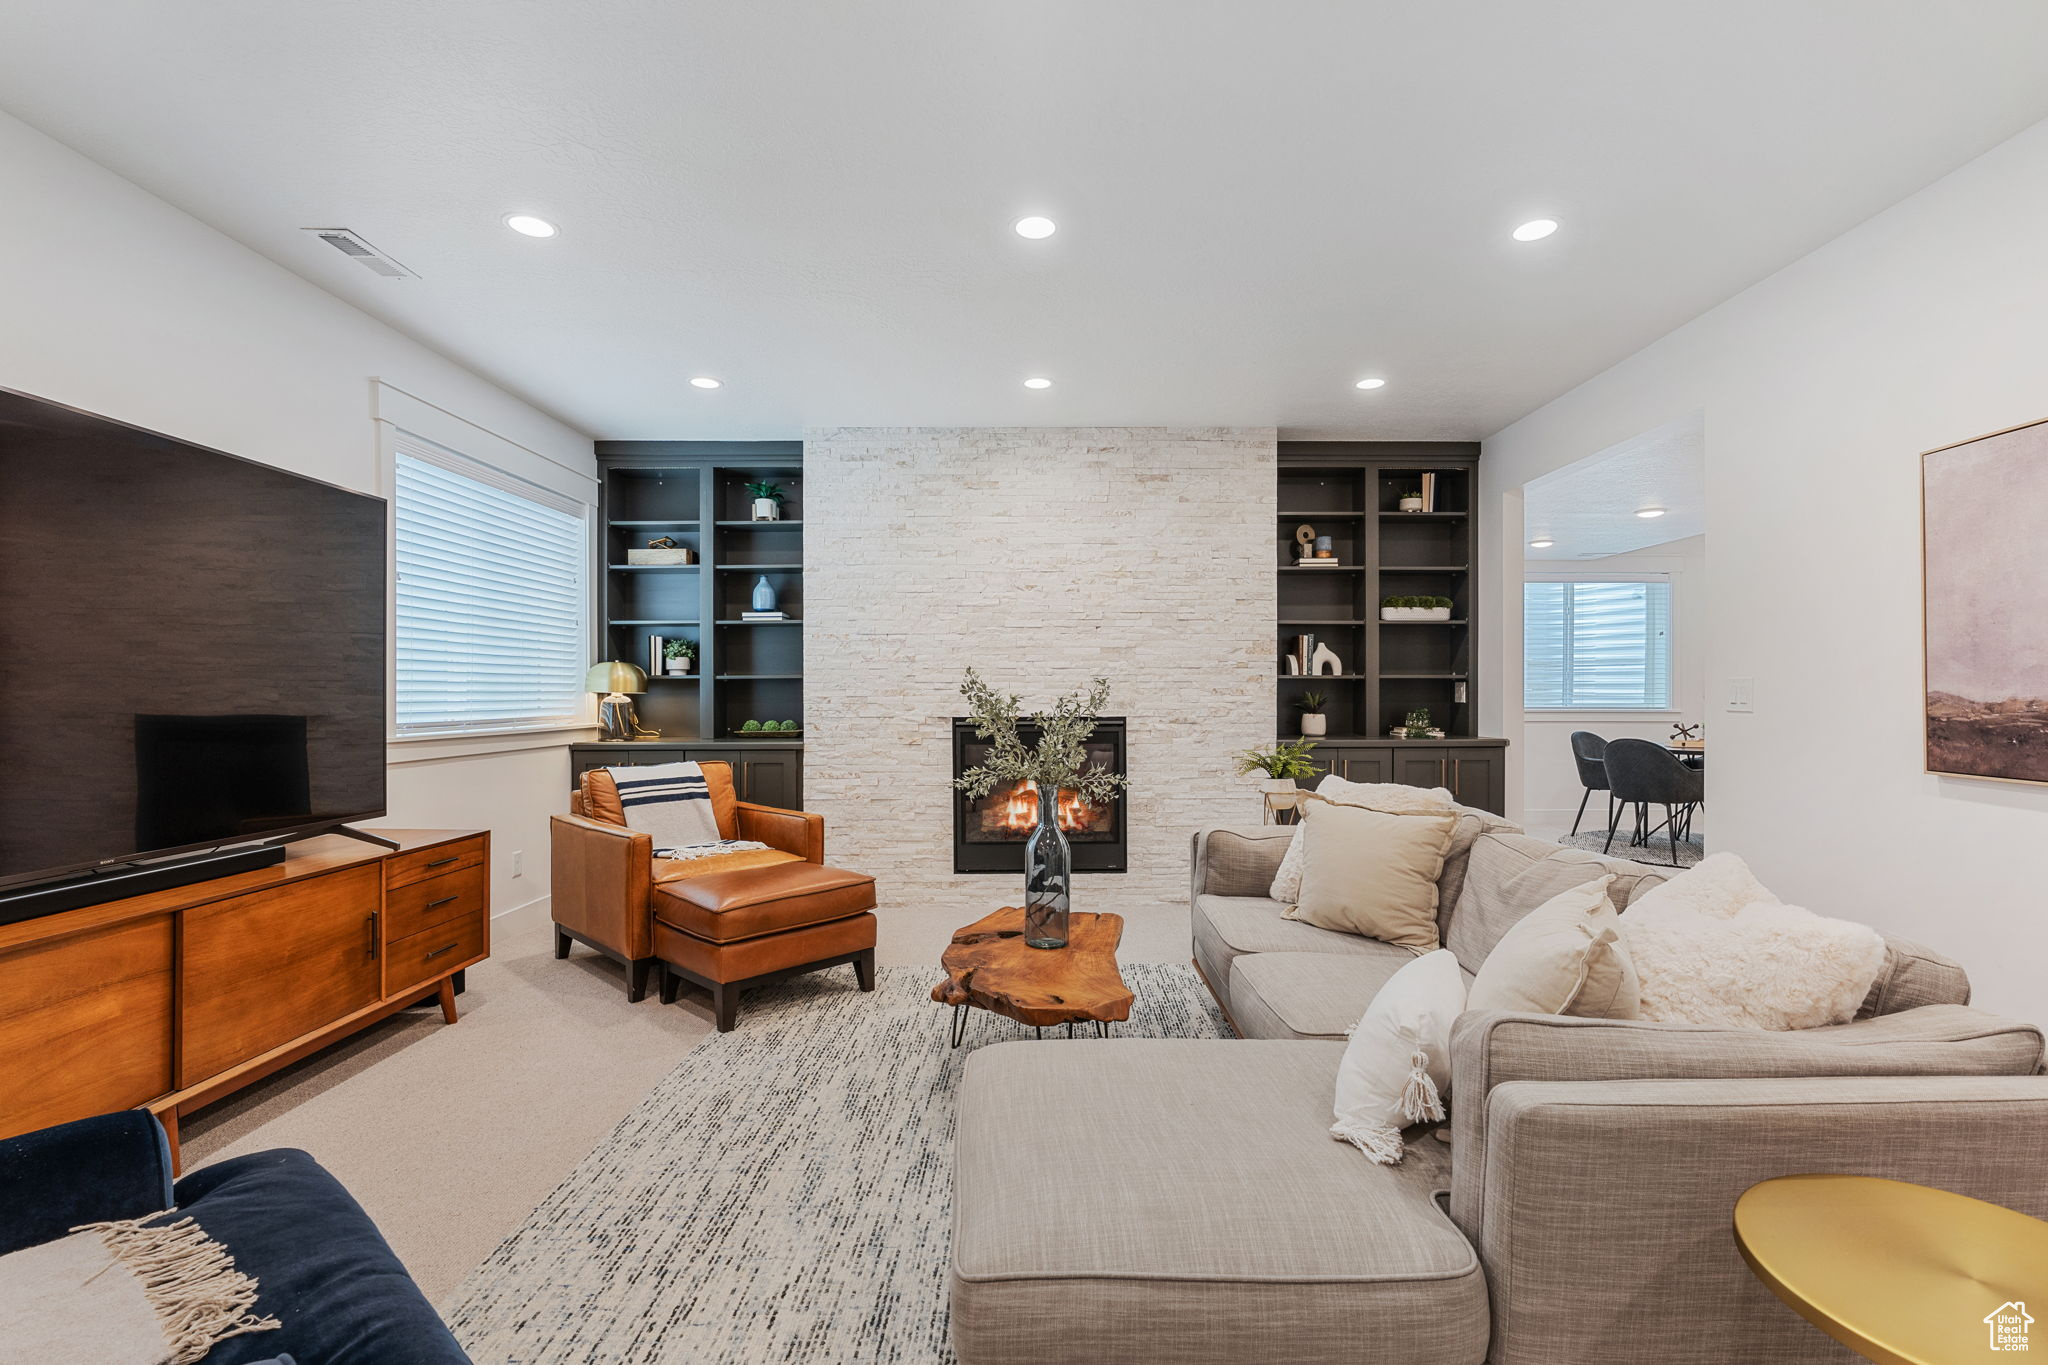 Living room with built in shelves, a 2nd gas fireplace, Hillburn wool carpet and white ledge stone finish feature wall.